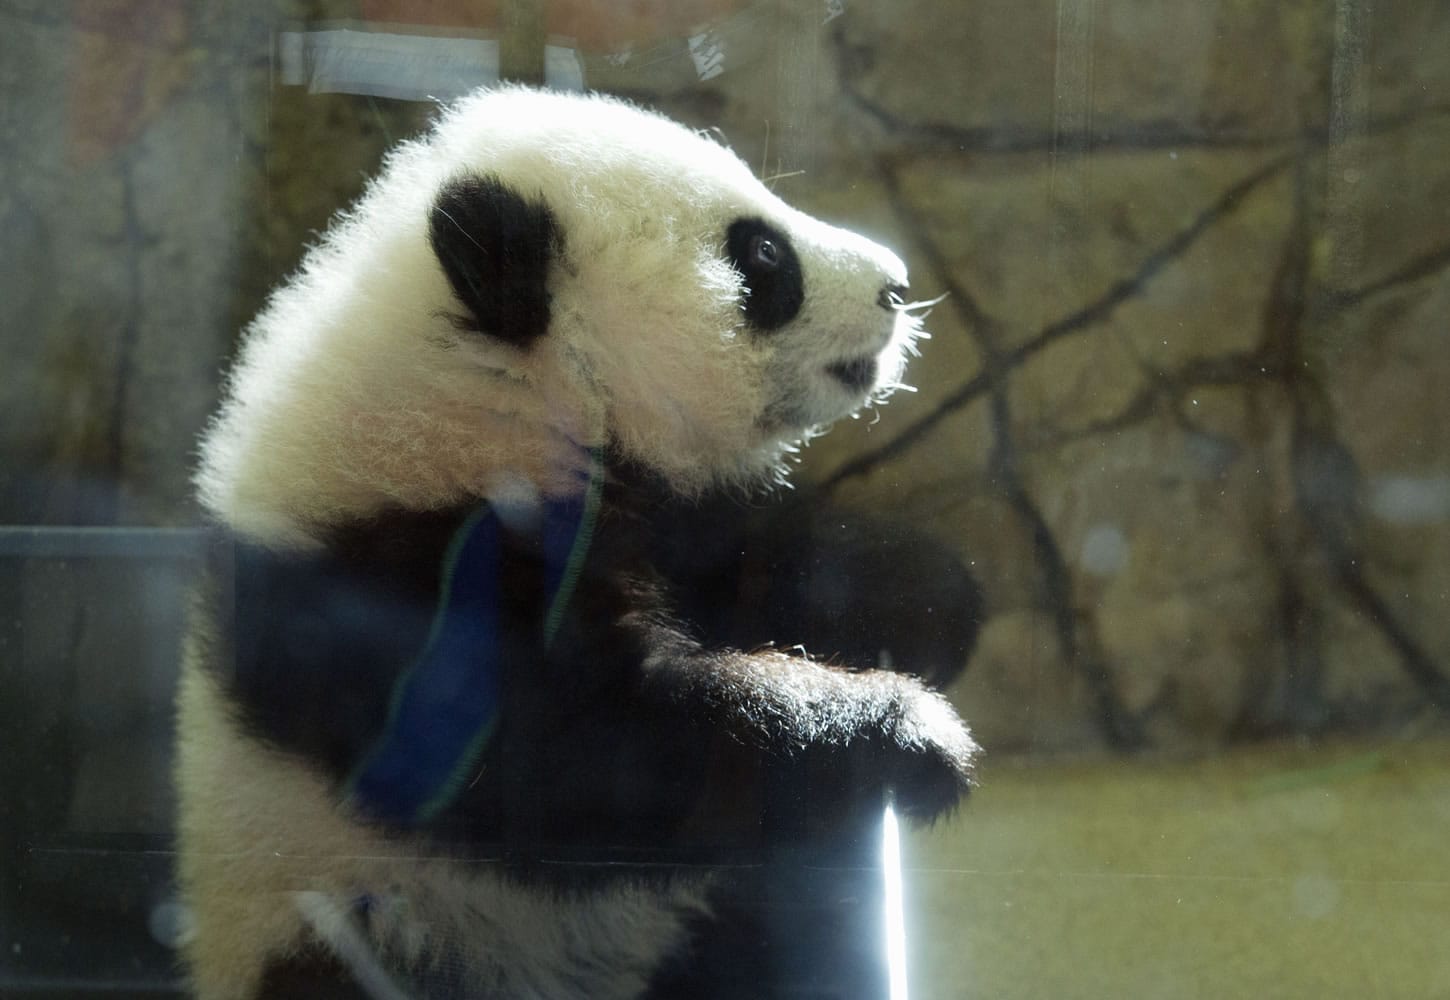 Giant panda cub Bei Bei, seen through glass, tries to get out of his box as he awakes Saturday at the National Zoo in Washington. The cub, born Aug. 22, 2015, made his public debut in January.